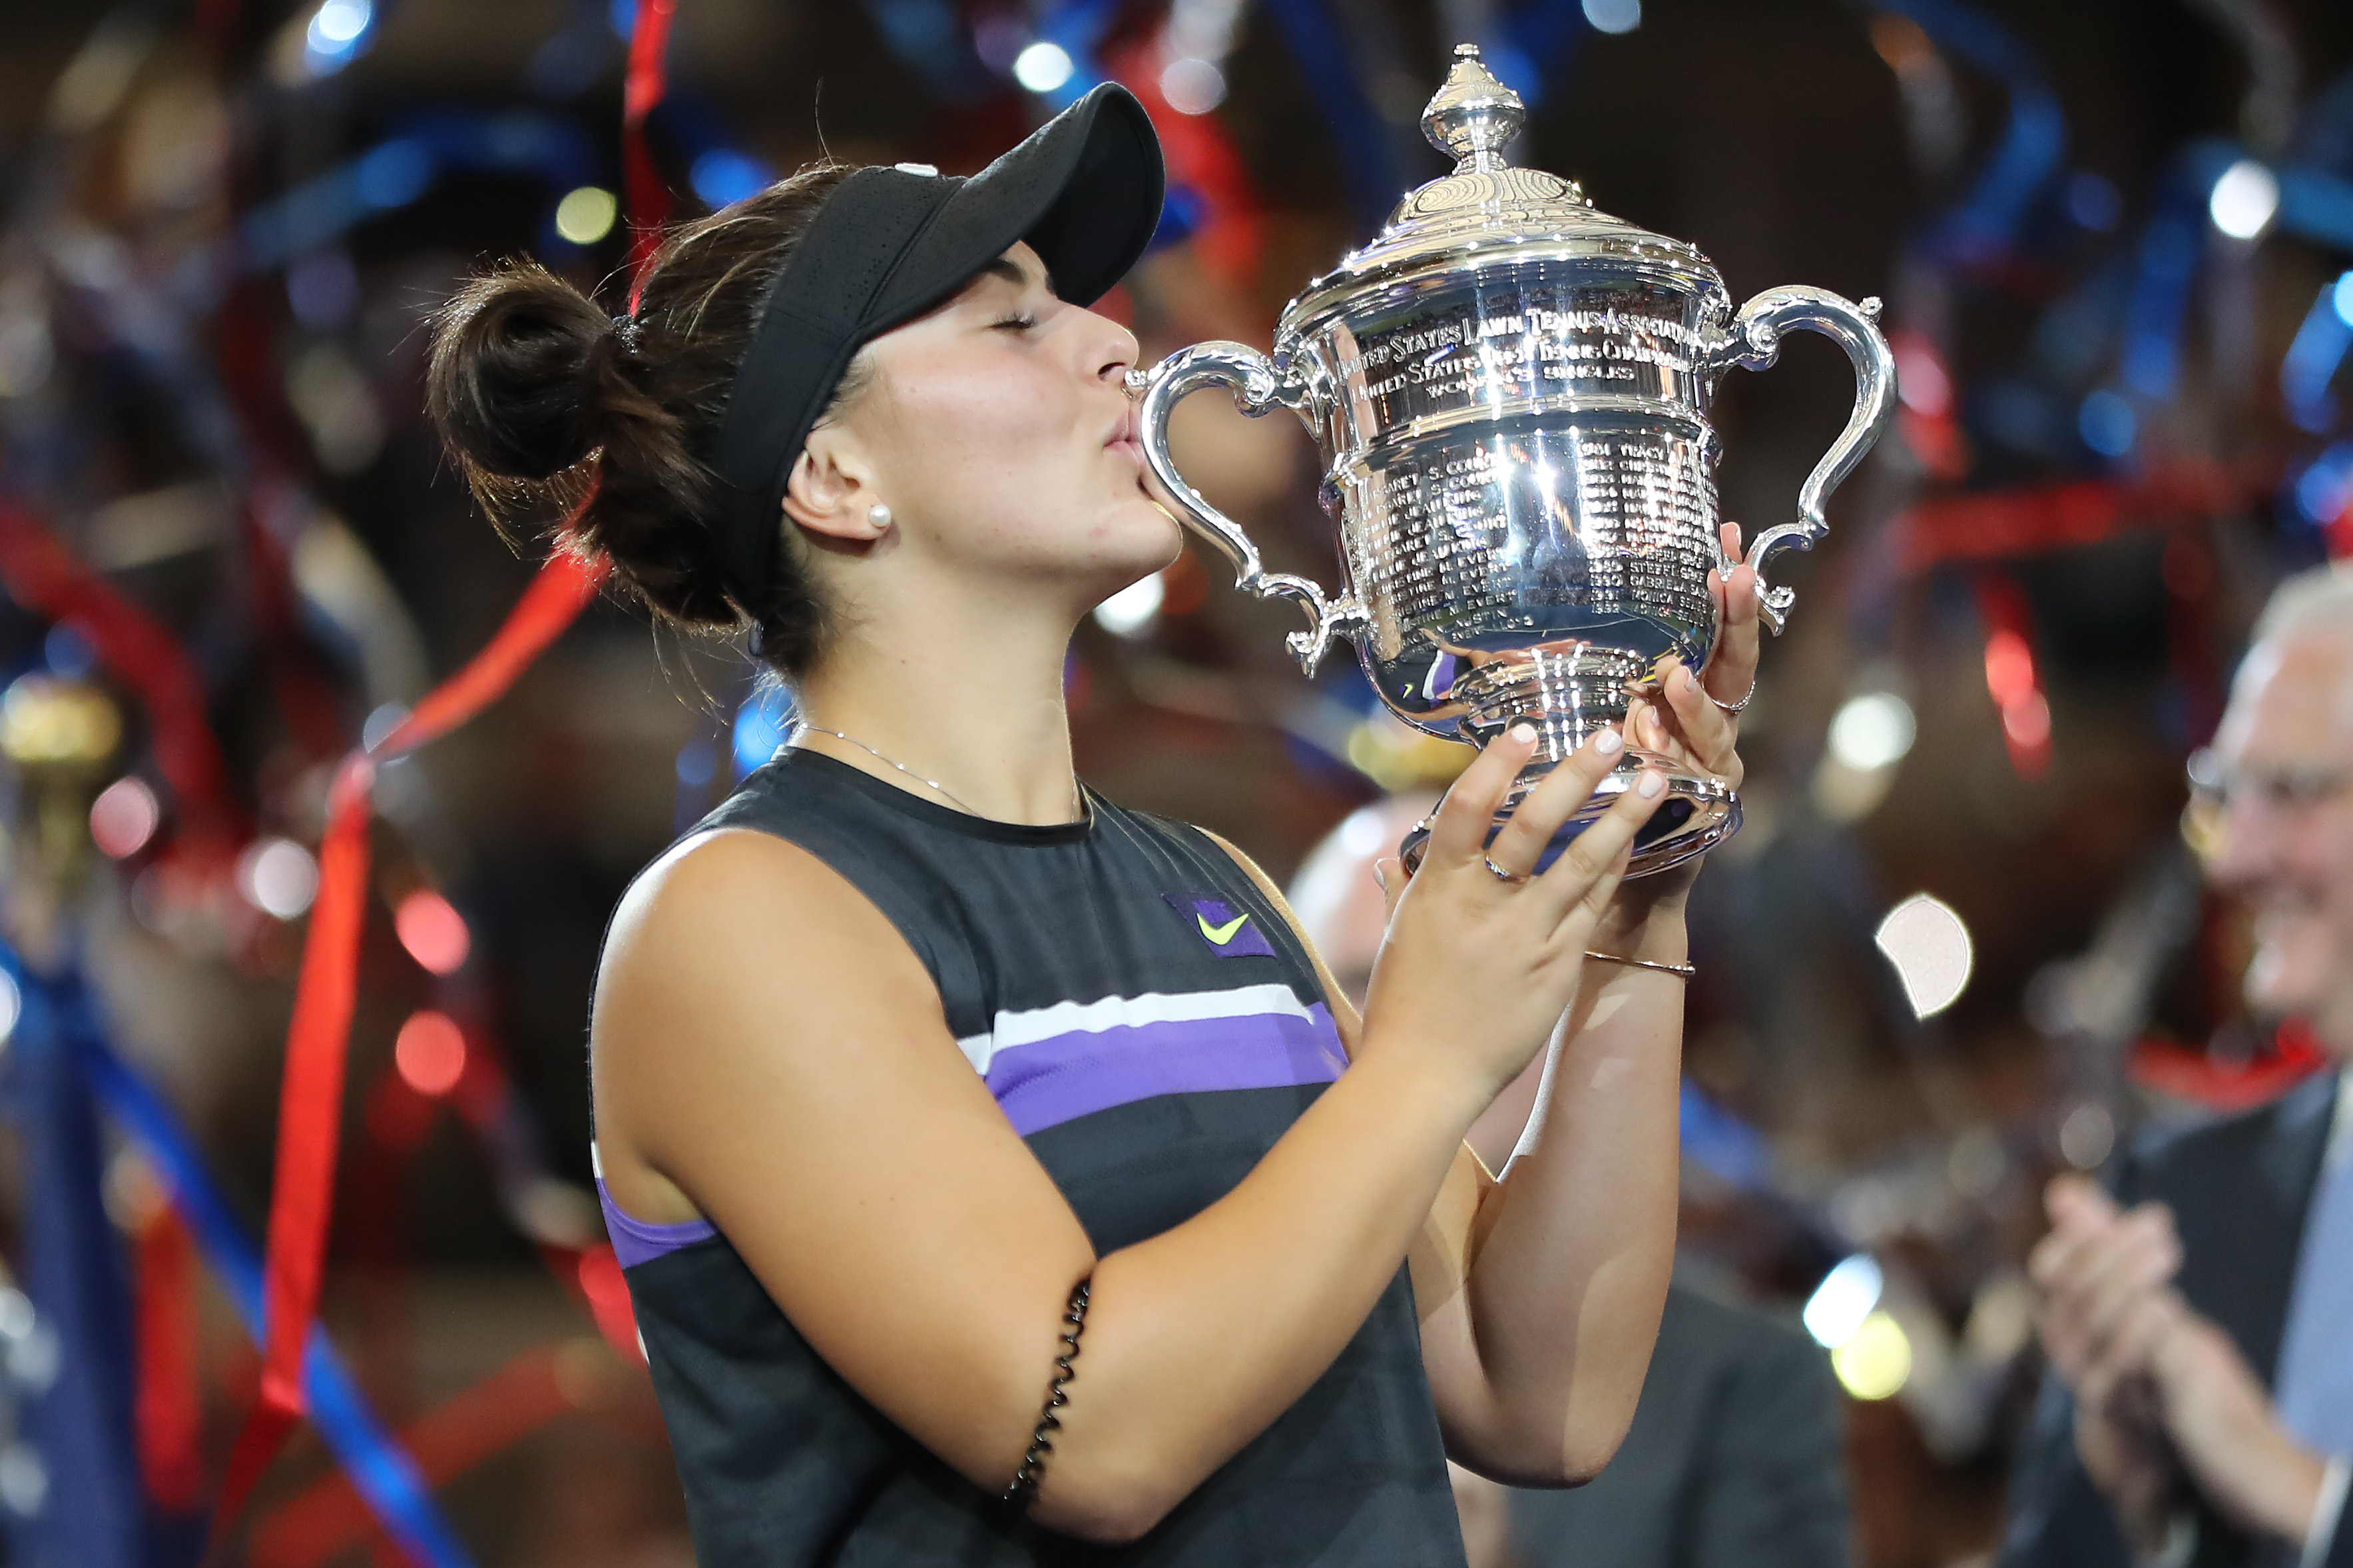 Bianca Andreescus Historic US OPEN Championship Attracts Record 3.4 Million Viewers, Becoming the Most-Watched Tennis Broadcast Ever on TSN and RDS